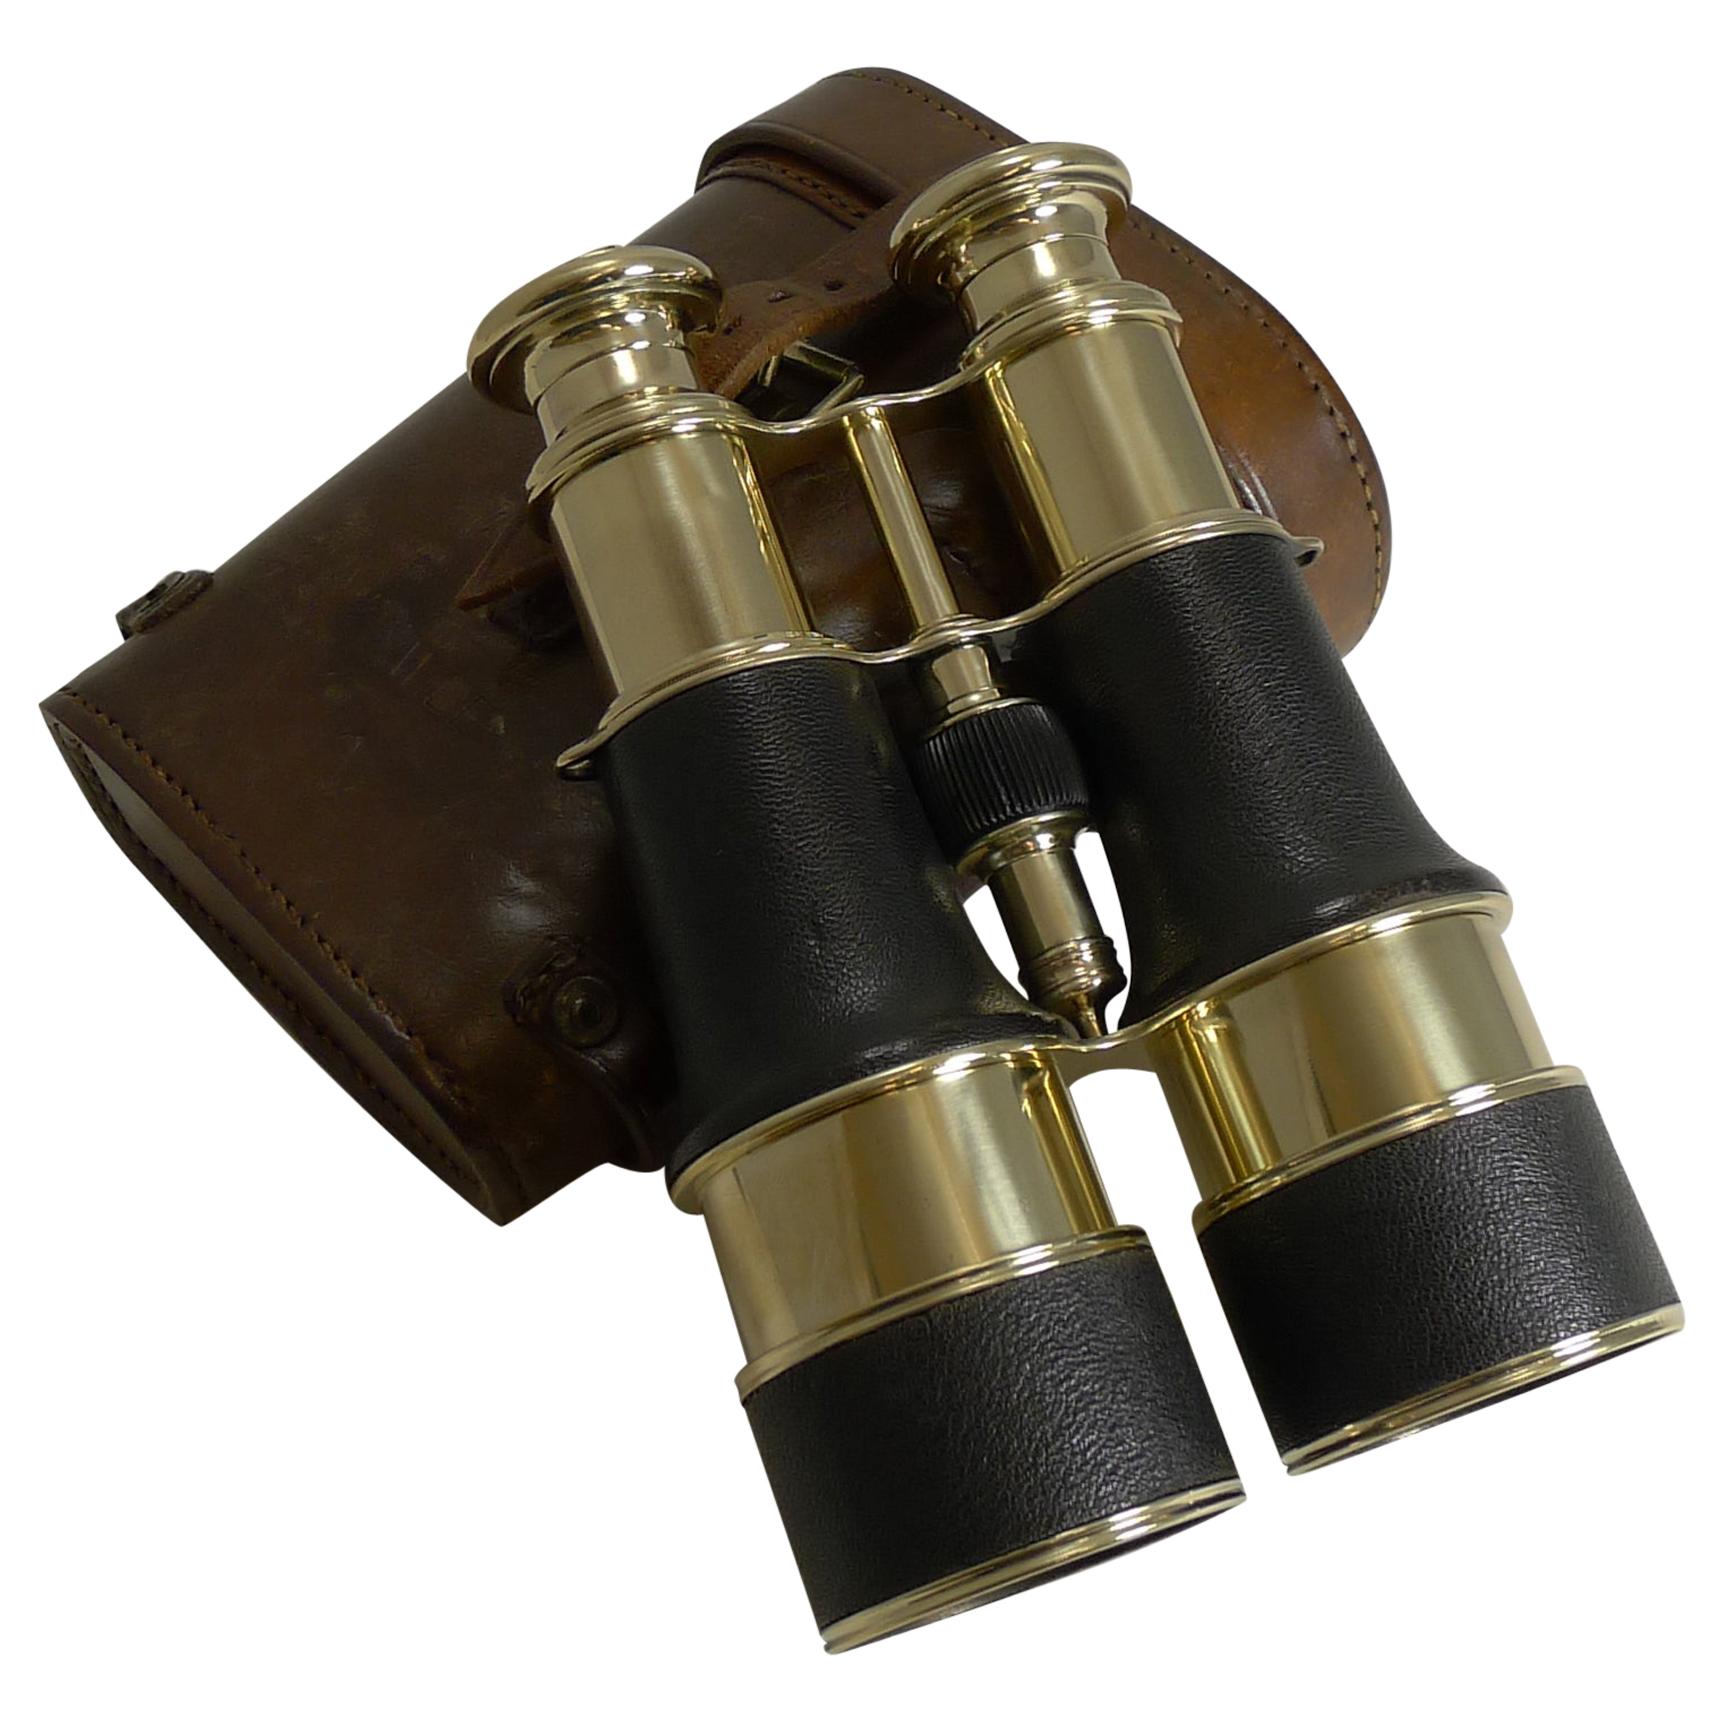 Pair of WWI Binoculars and Case, British Officer's Issue, 1916, LeMaire, Paris